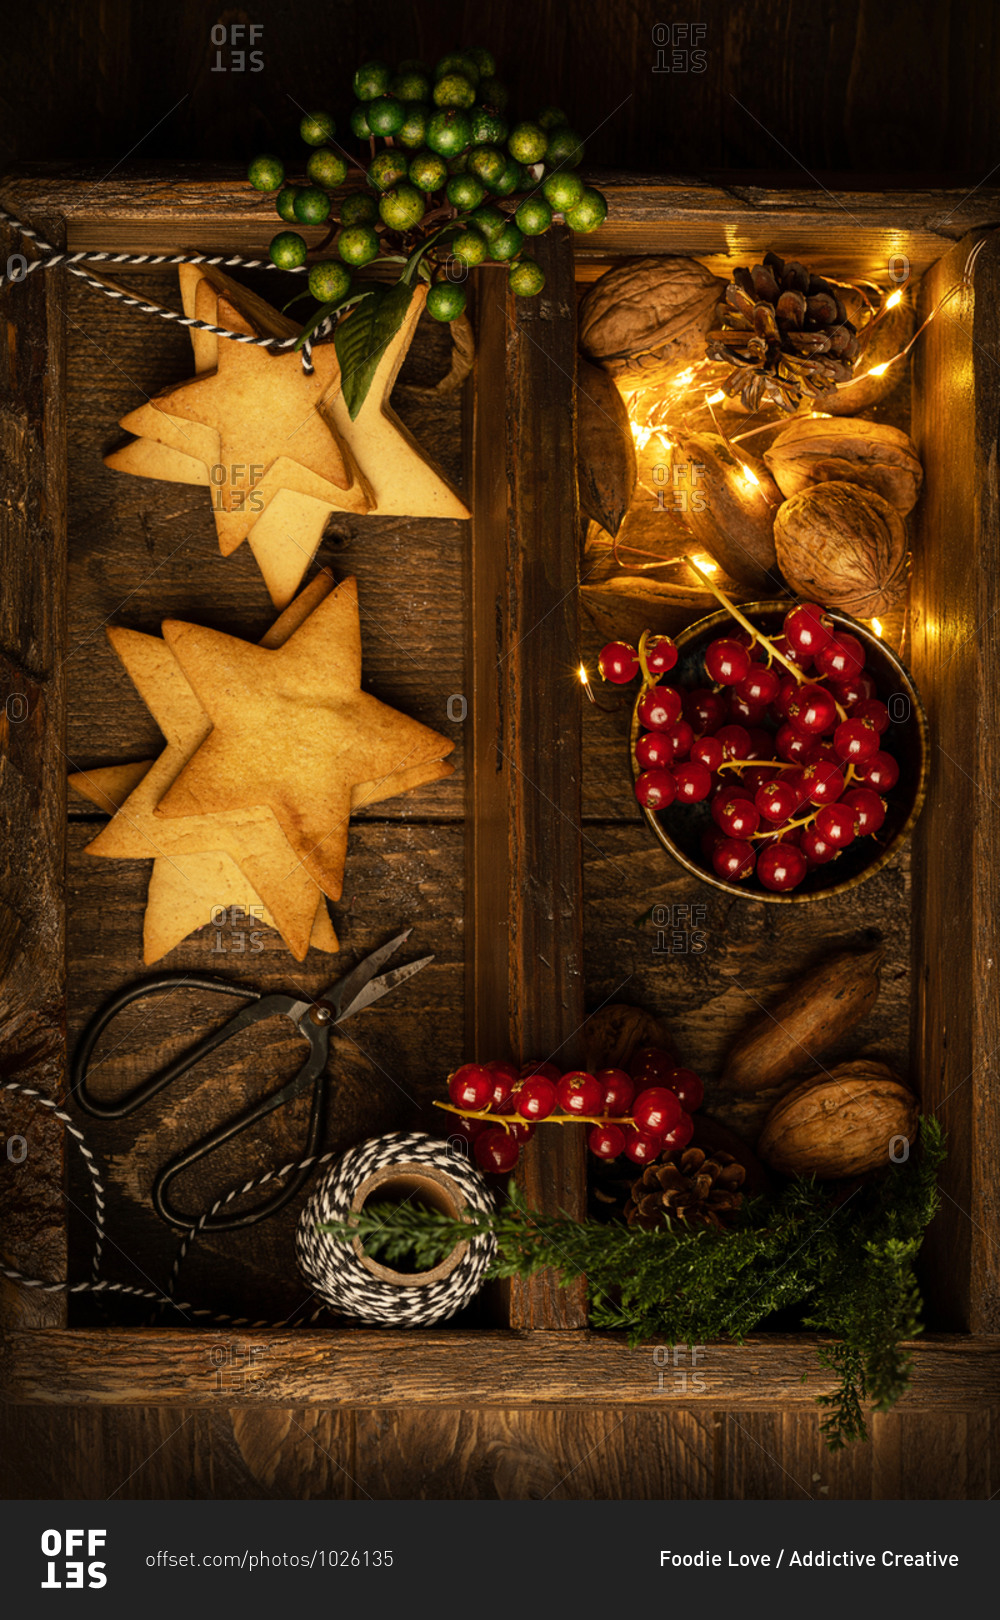 Top view of tasty cookies in shape of star and red berries arranged with illuminated garland and nuts on wooden table in dark room for Christmas celebration